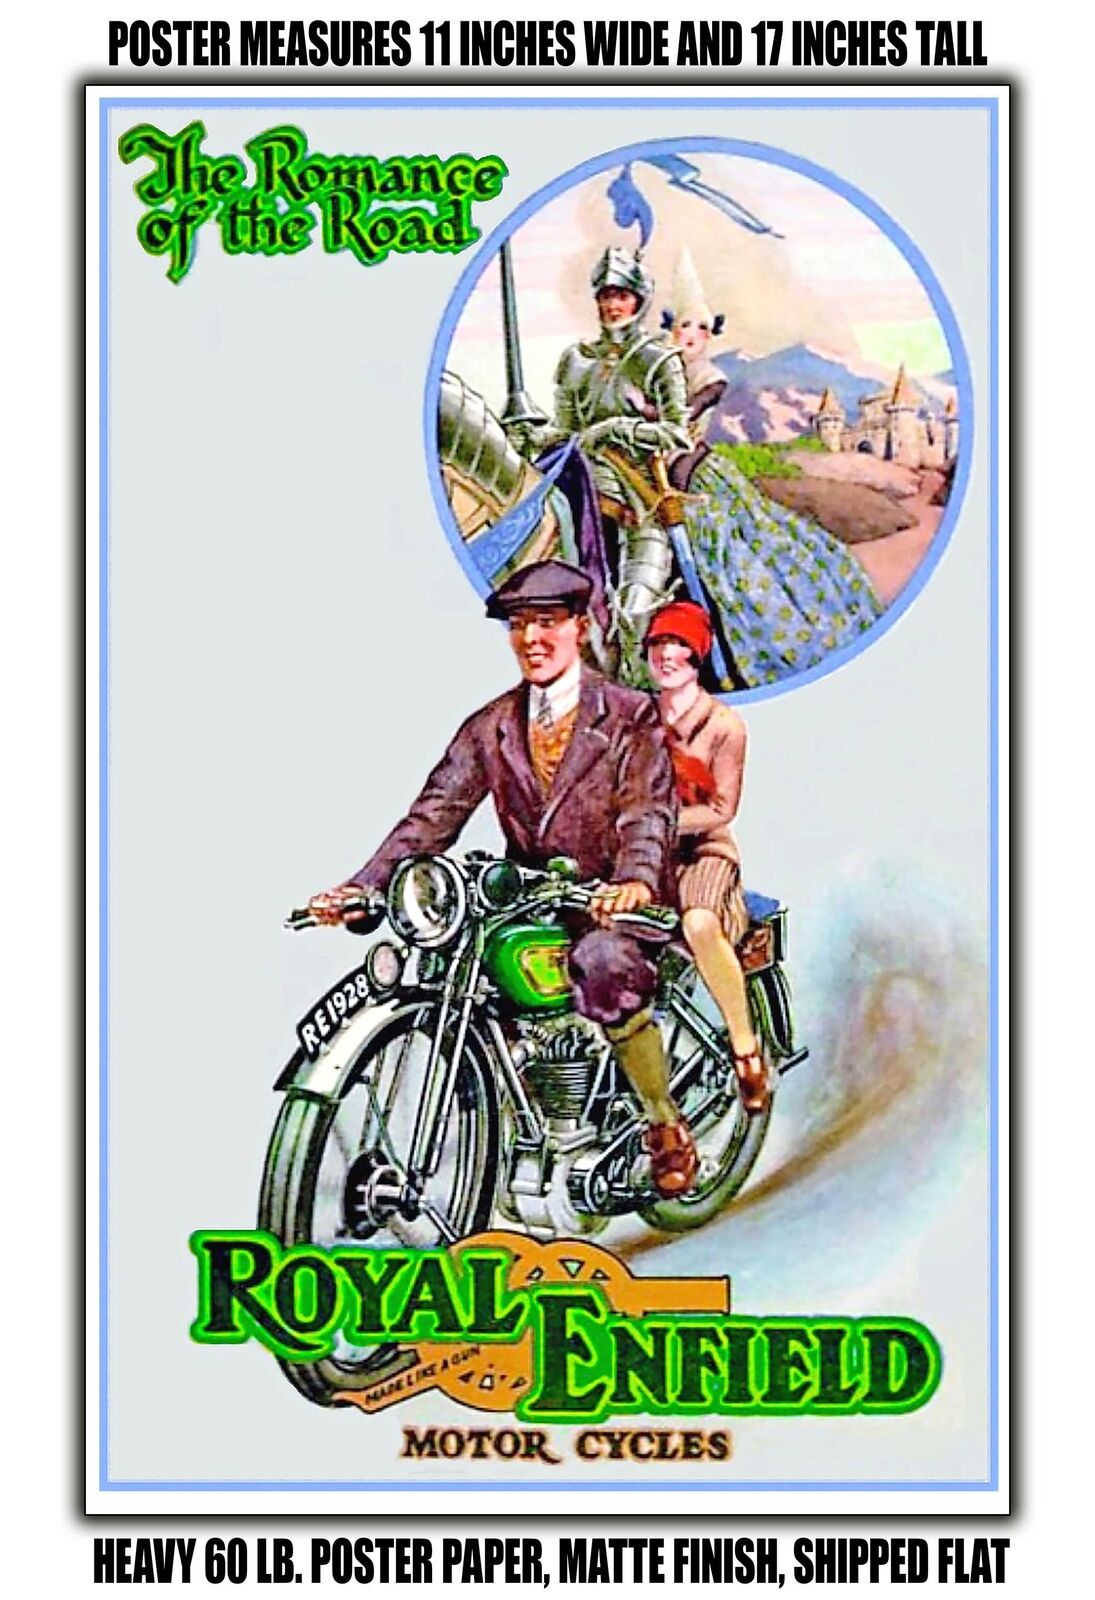 11x17 POSTER - 1928 Royal Enfield Motorcycles the Romance of the Road